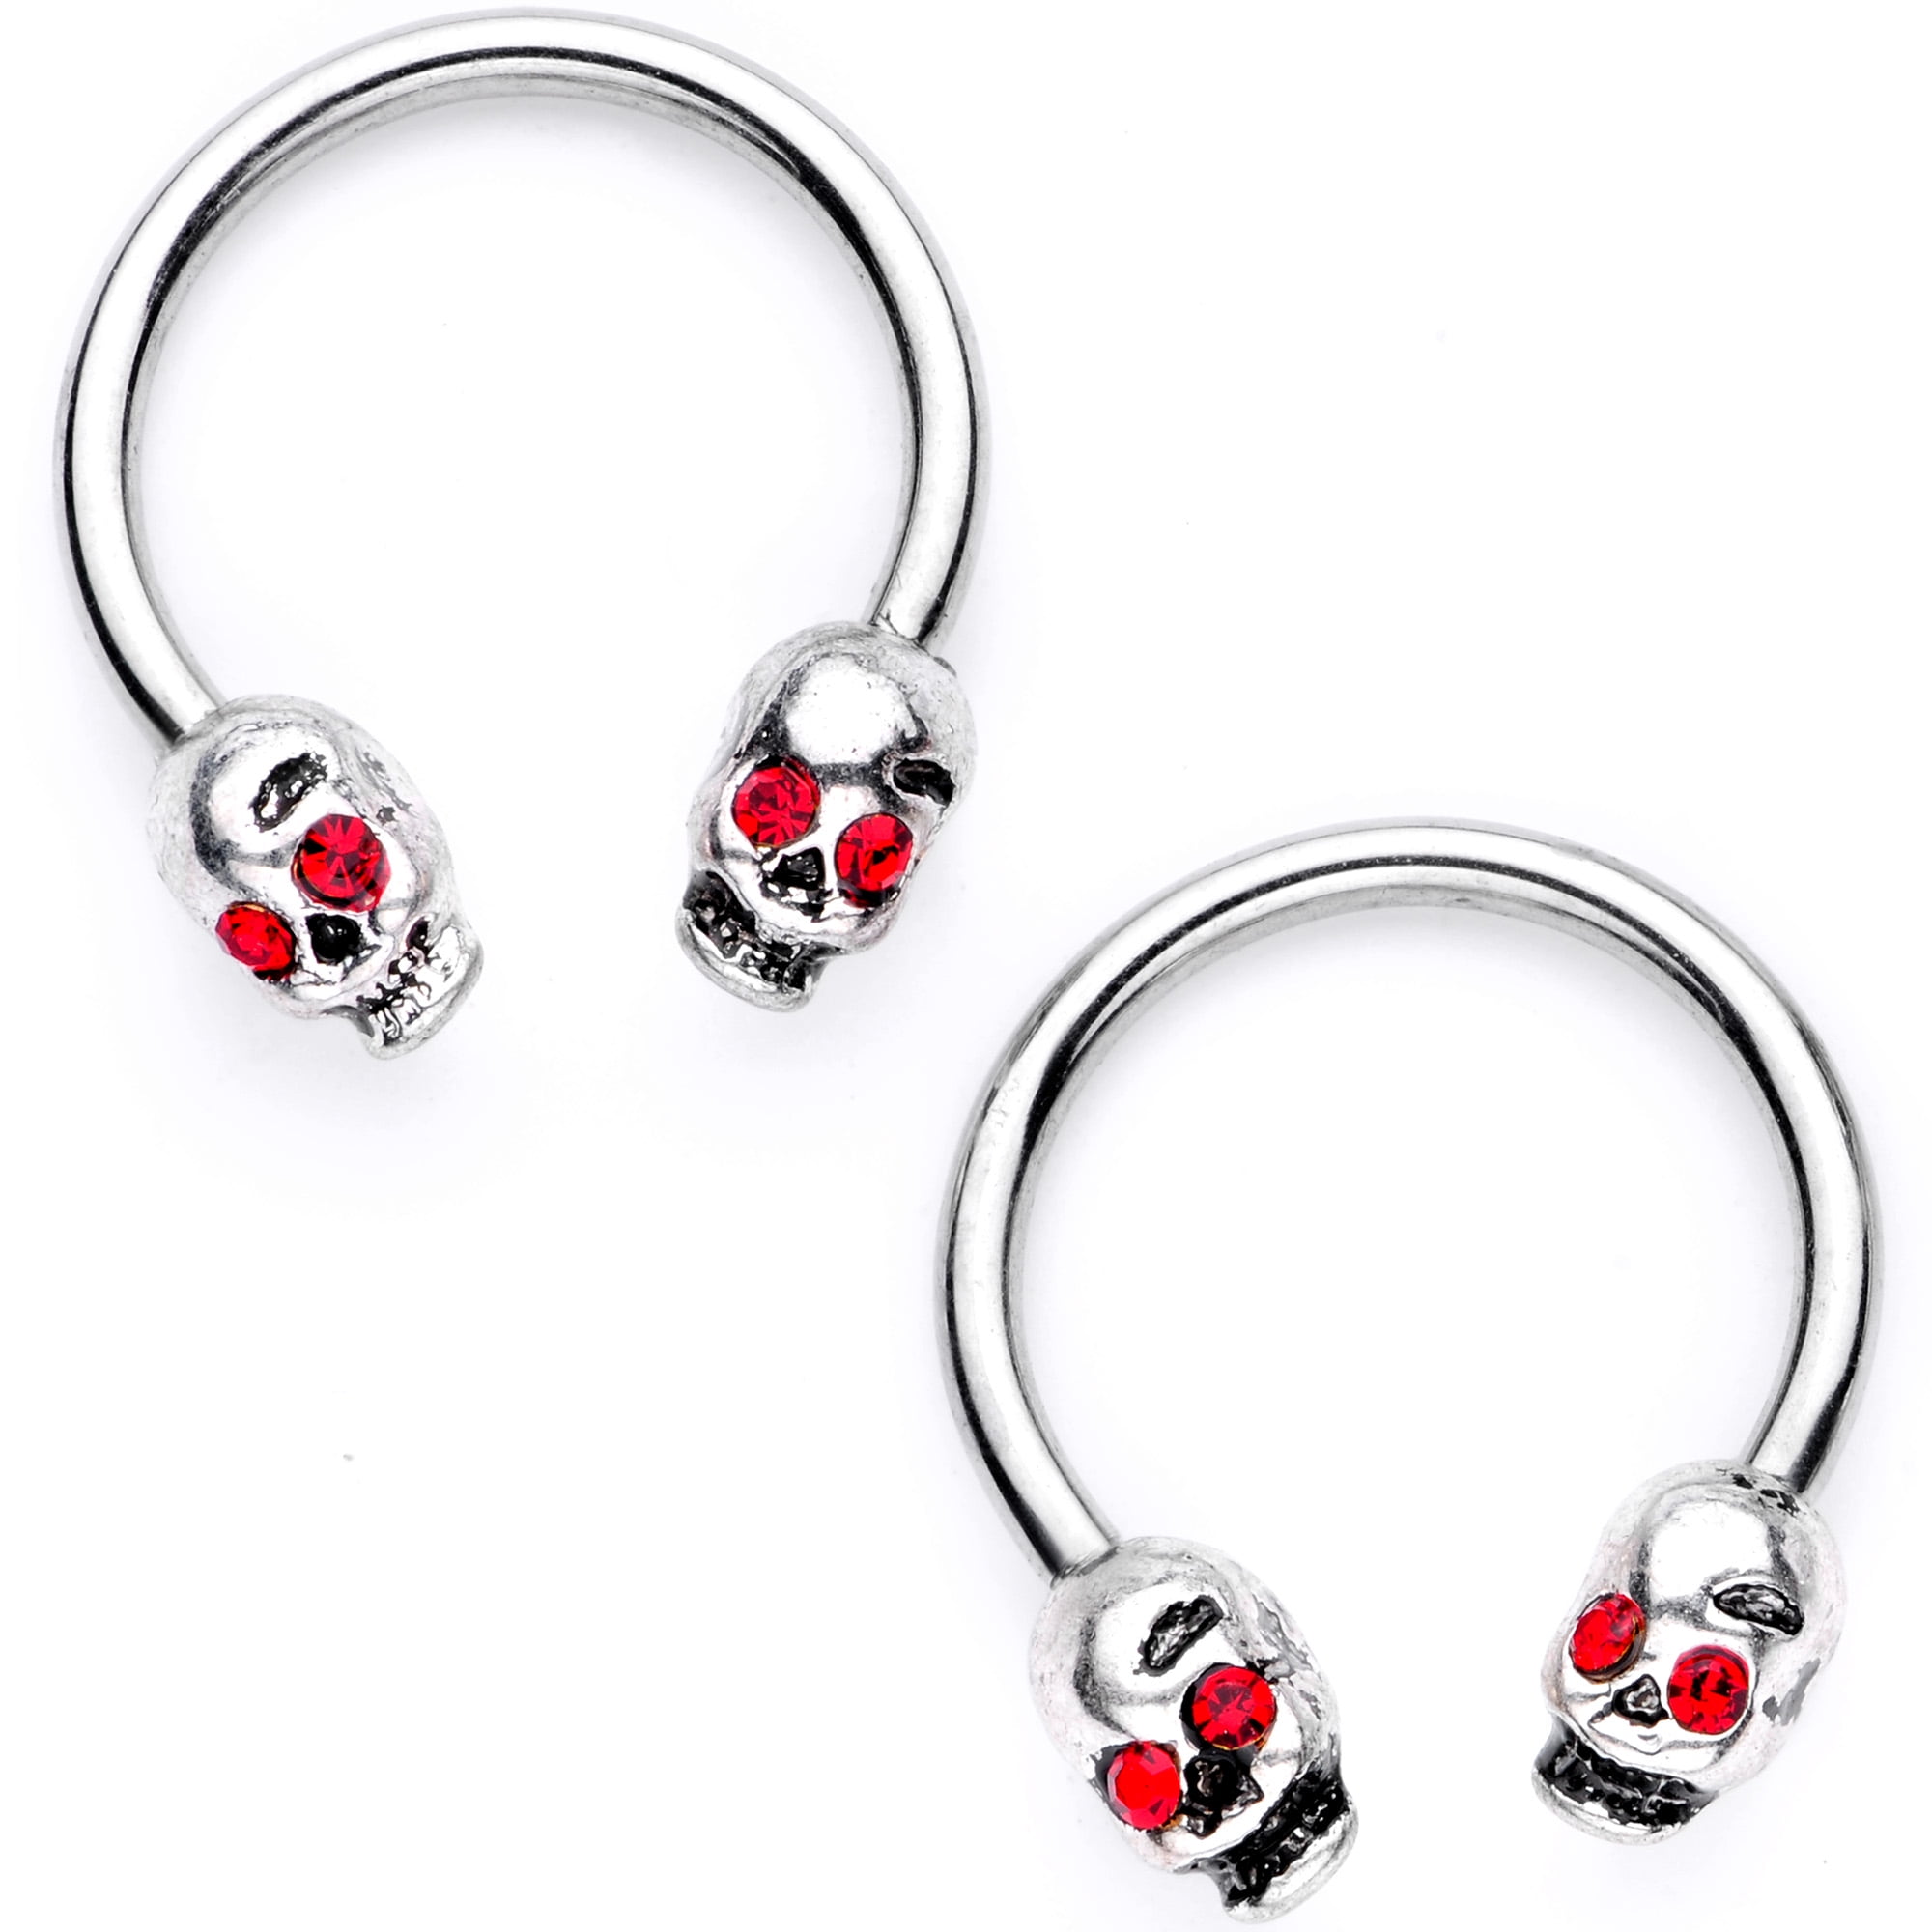 Body Candy 4 Pc 16G Stainless Steel Eyebrow Ring Skull Lip Ring